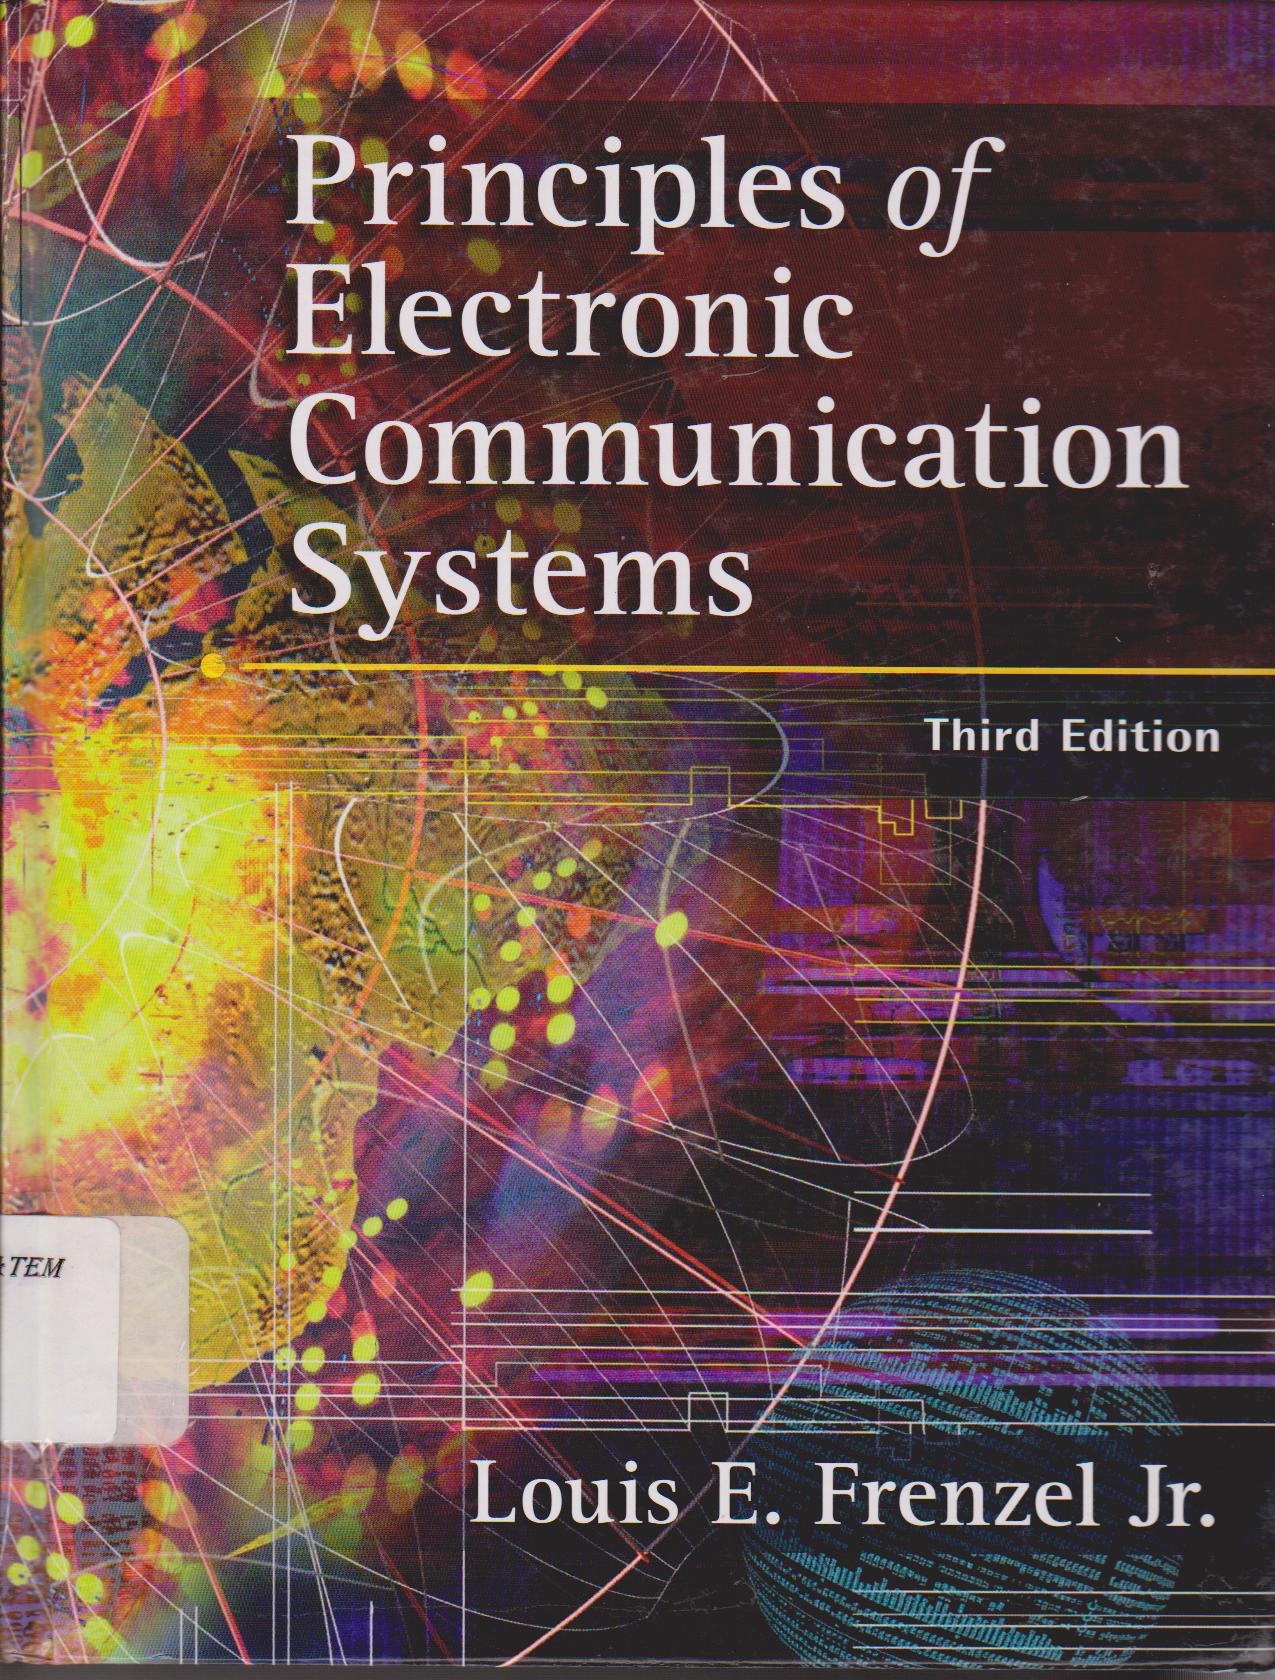 Priciples of Electronic Communication Systems